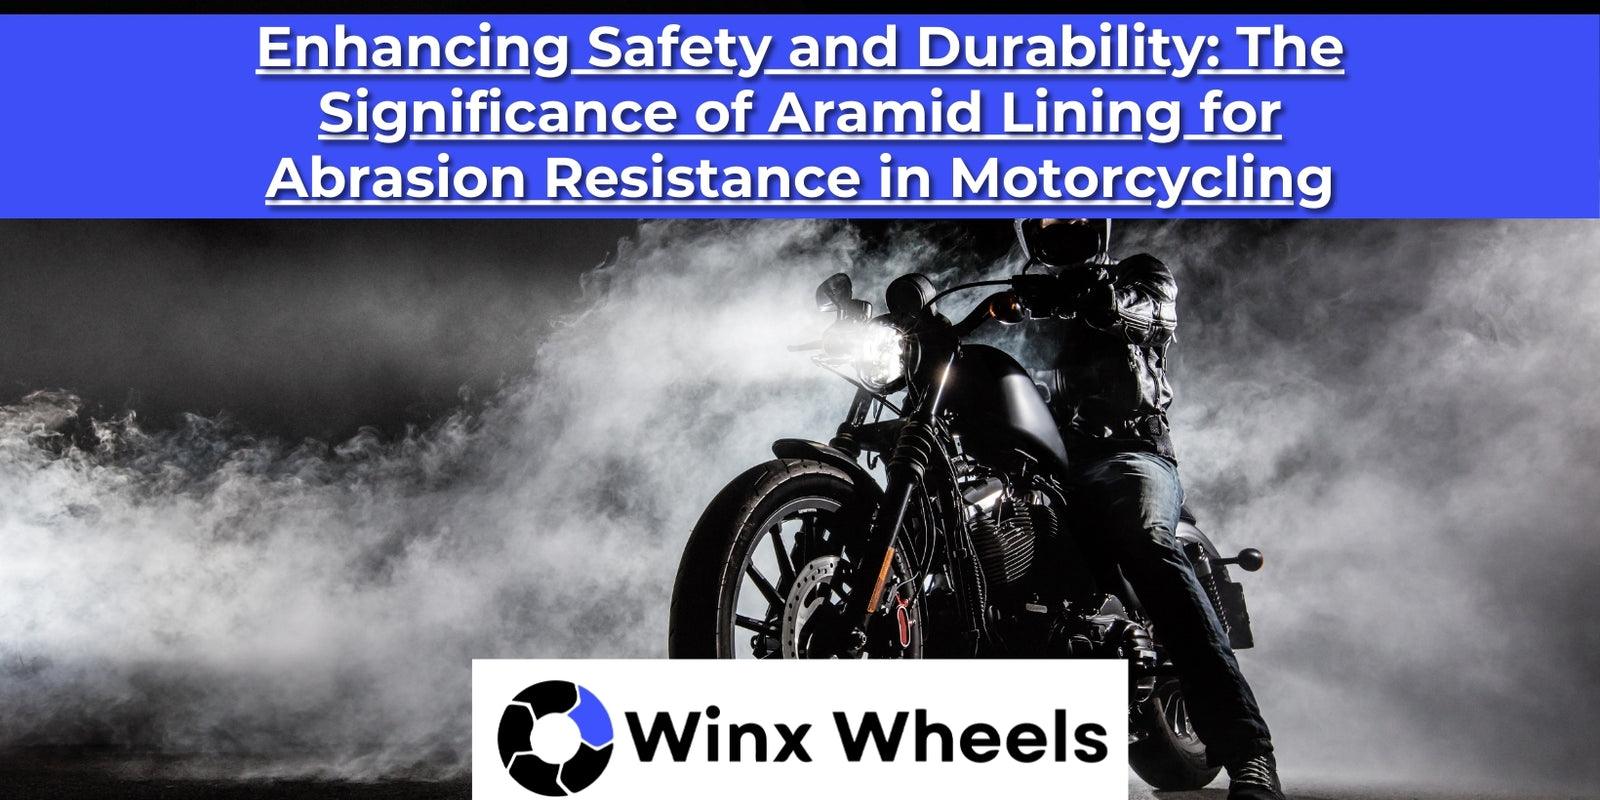 Enhancing Safety and Durability The Significance of Aramid Lining for Abrasion Resistance in Motorcycling